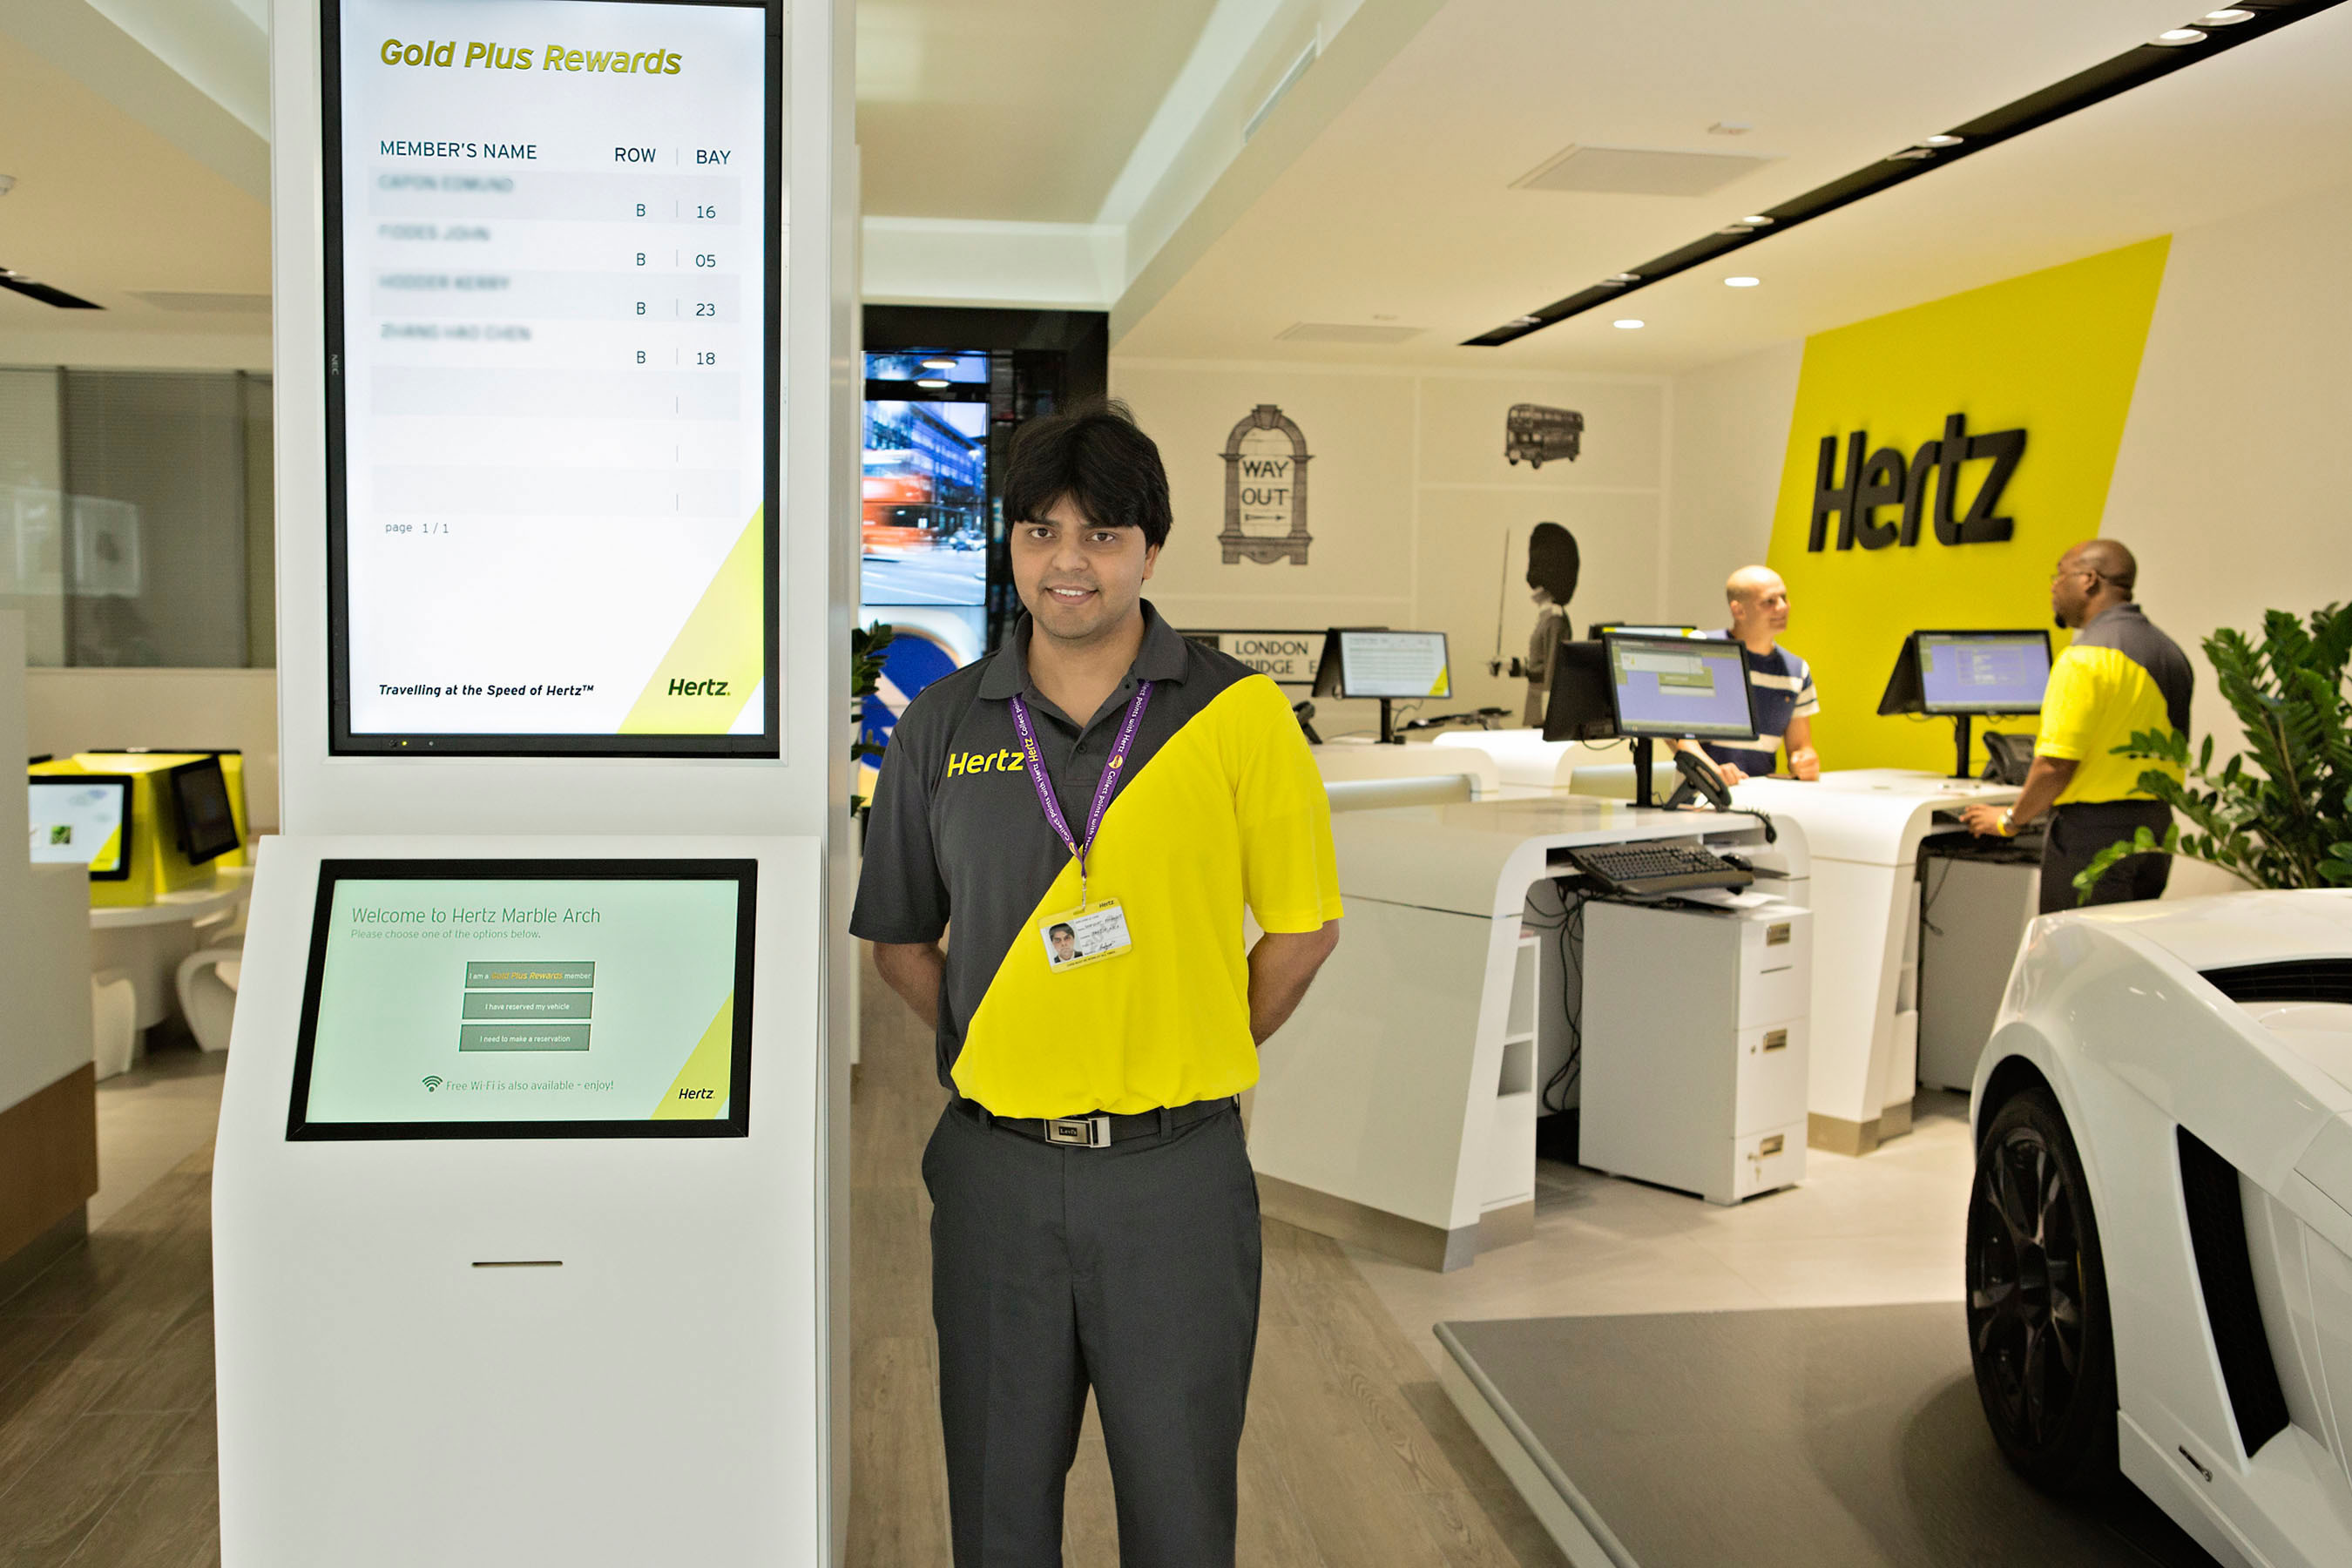 Hertz enhances customer service at its London, Marble Arch location, with a trendy makeover including a concierge-style service, Hertz Supercar display, complimentary internet access and self service video kiosks. (PRNewsFoto/The Hertz Corporation) (PRNewsFoto/THE HERTZ CORPORATION)